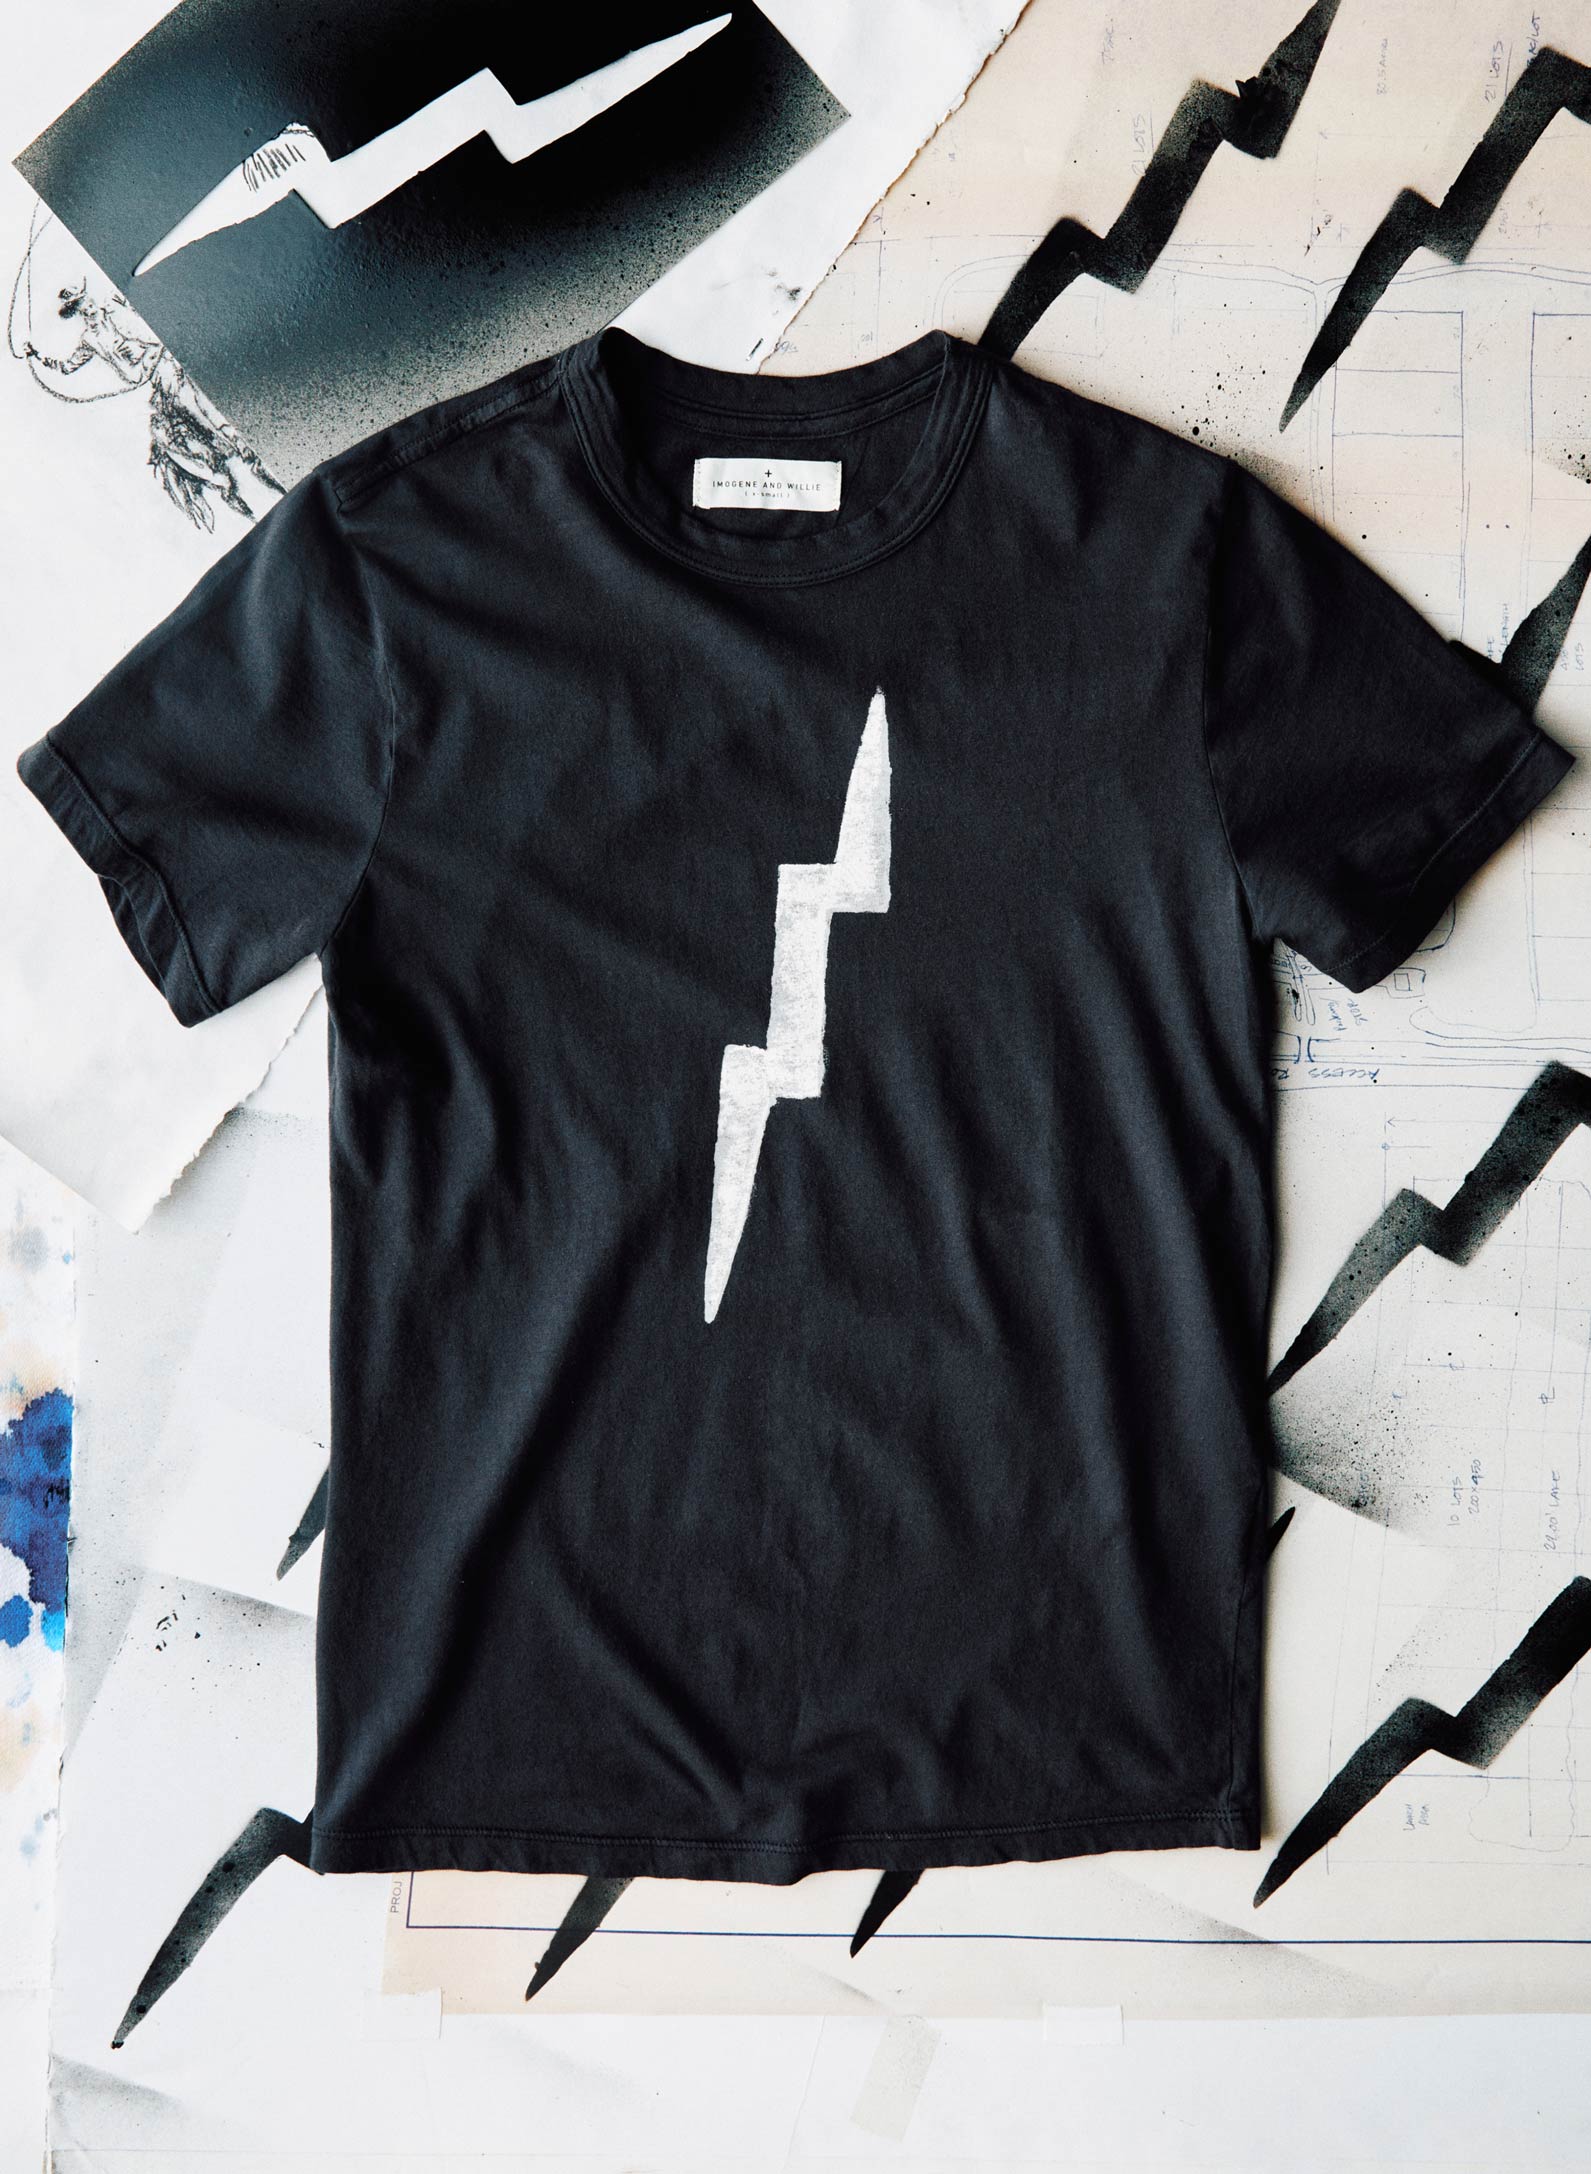 BOLT TEE  LIVE FIT